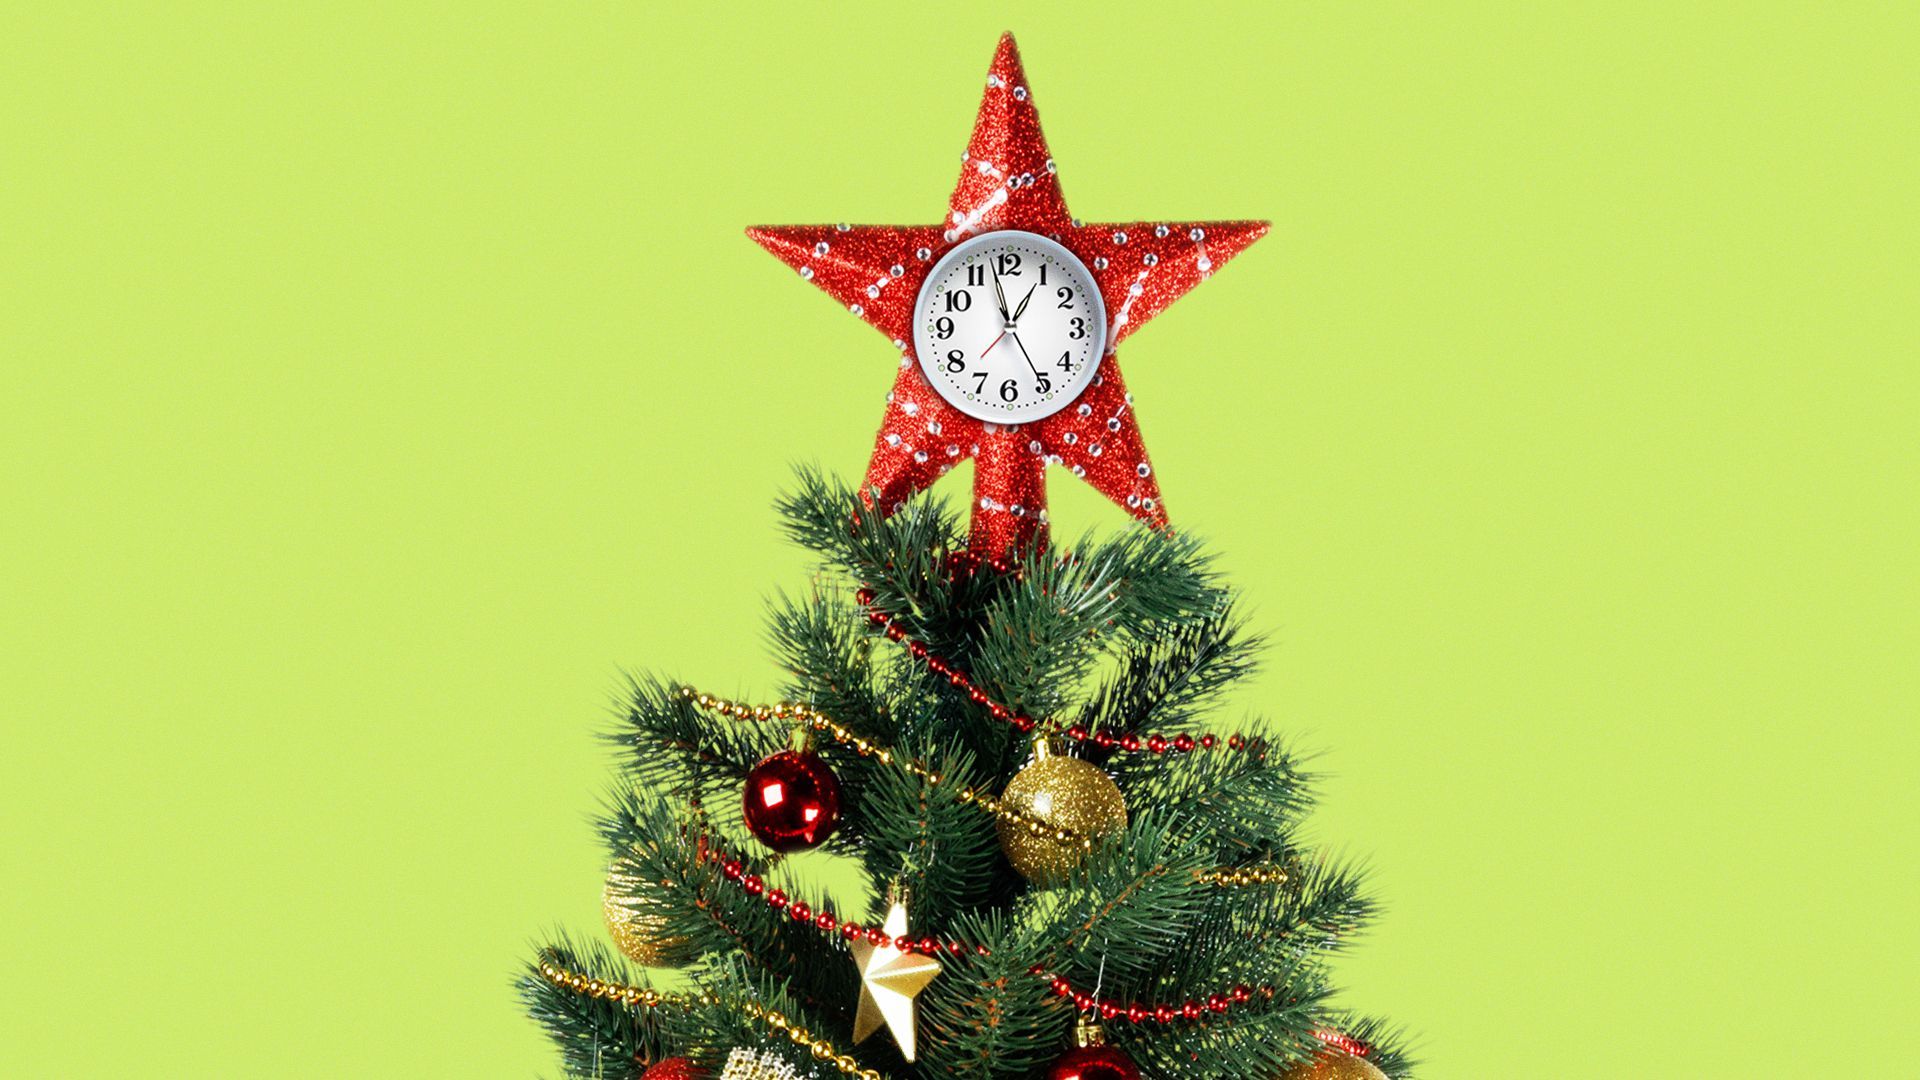 A Christmas tree with a clock in the star on top.